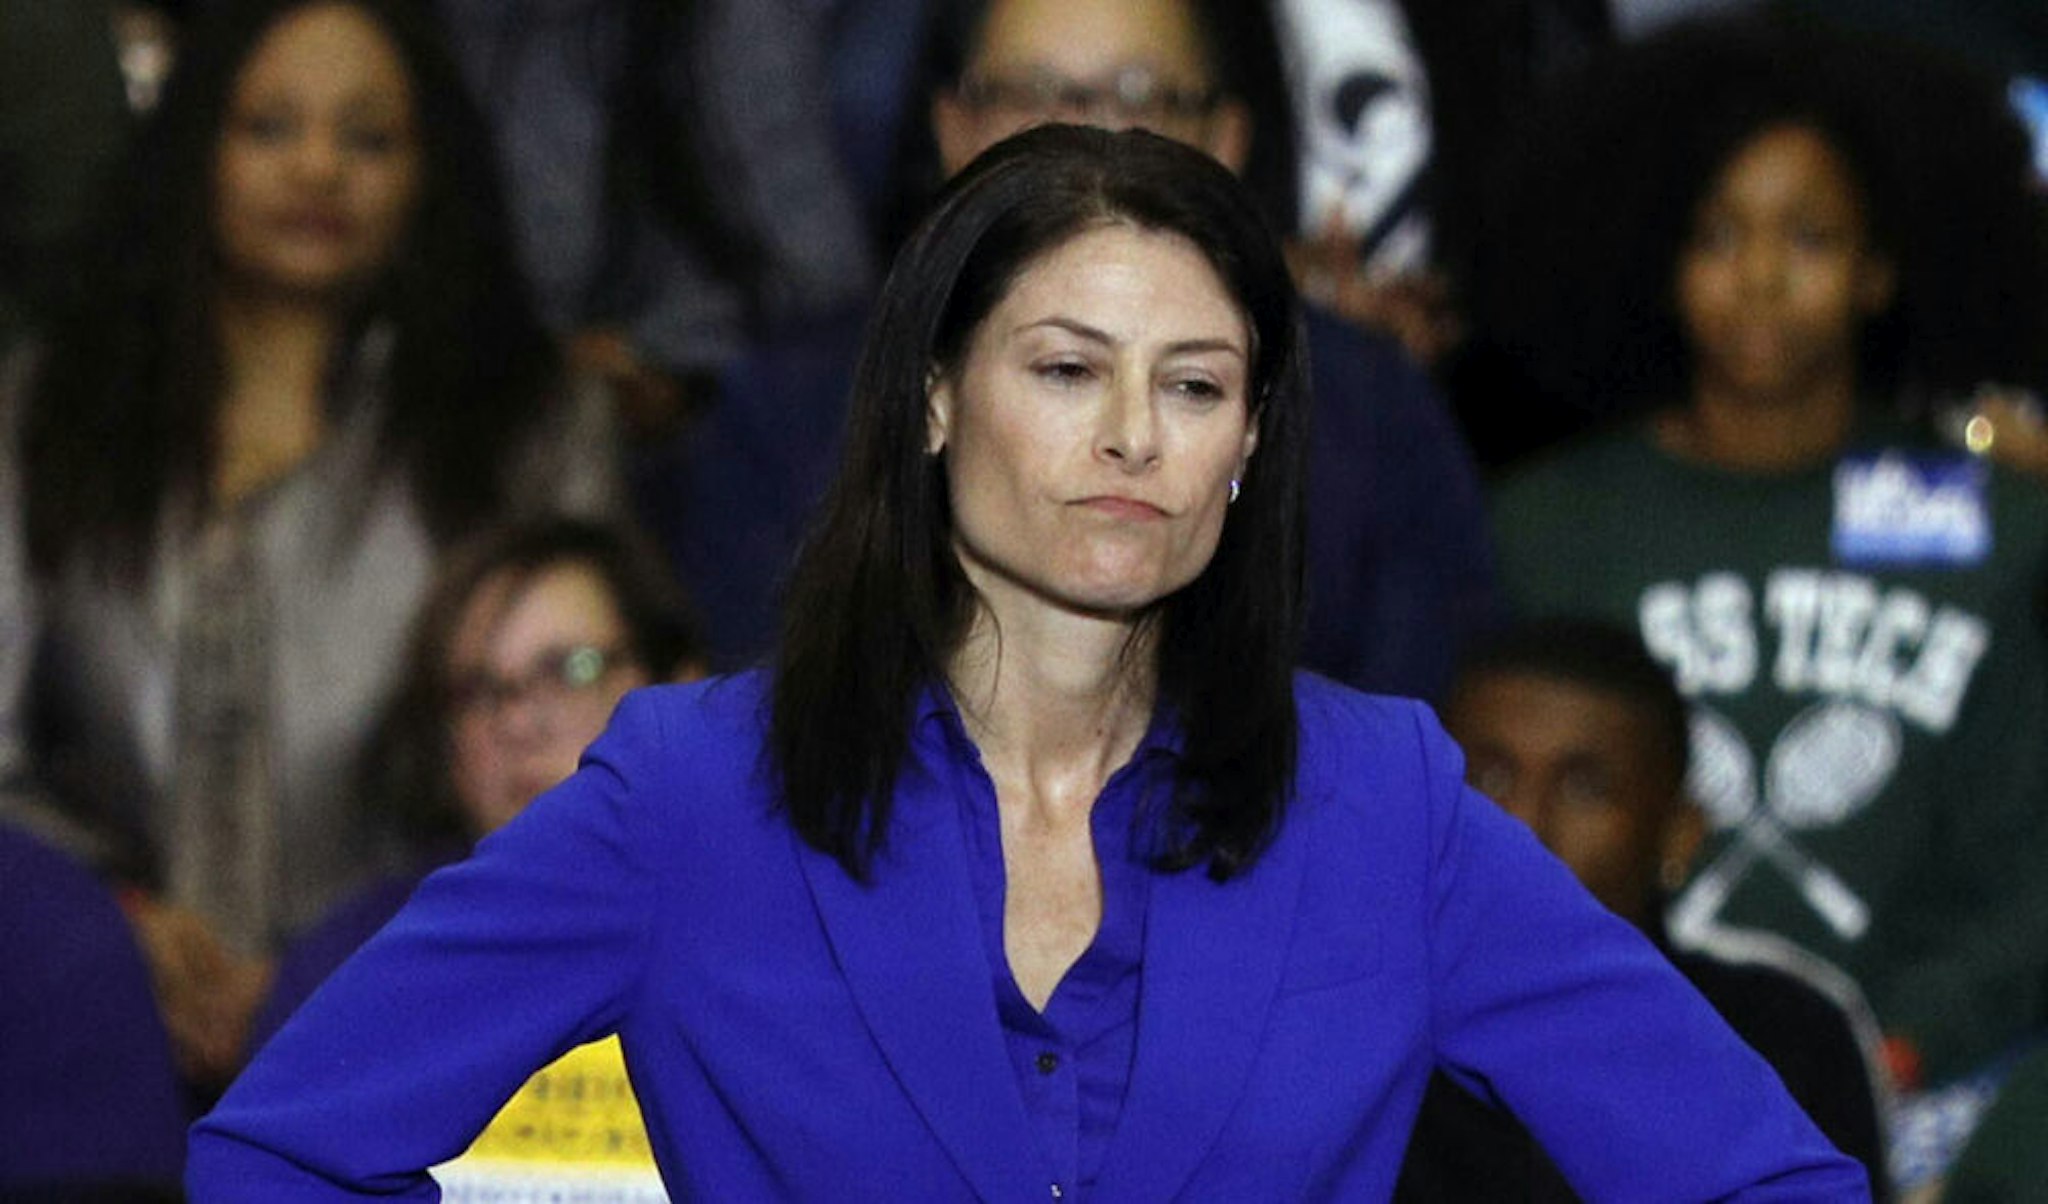 Michigan attorney general candidate Dana Nessel speaks at a Democratic rally attended by former President Barack Obama and former Attorney General Eric Holder at Detroit Cass Tech High School on October 26, 2018 in Detroit, Michigan. Obama, and Holder are among approximately a dozen democrats who were targeted by mail bombs over the past several days. (Photo by Bill Pugliano/Getty Images)